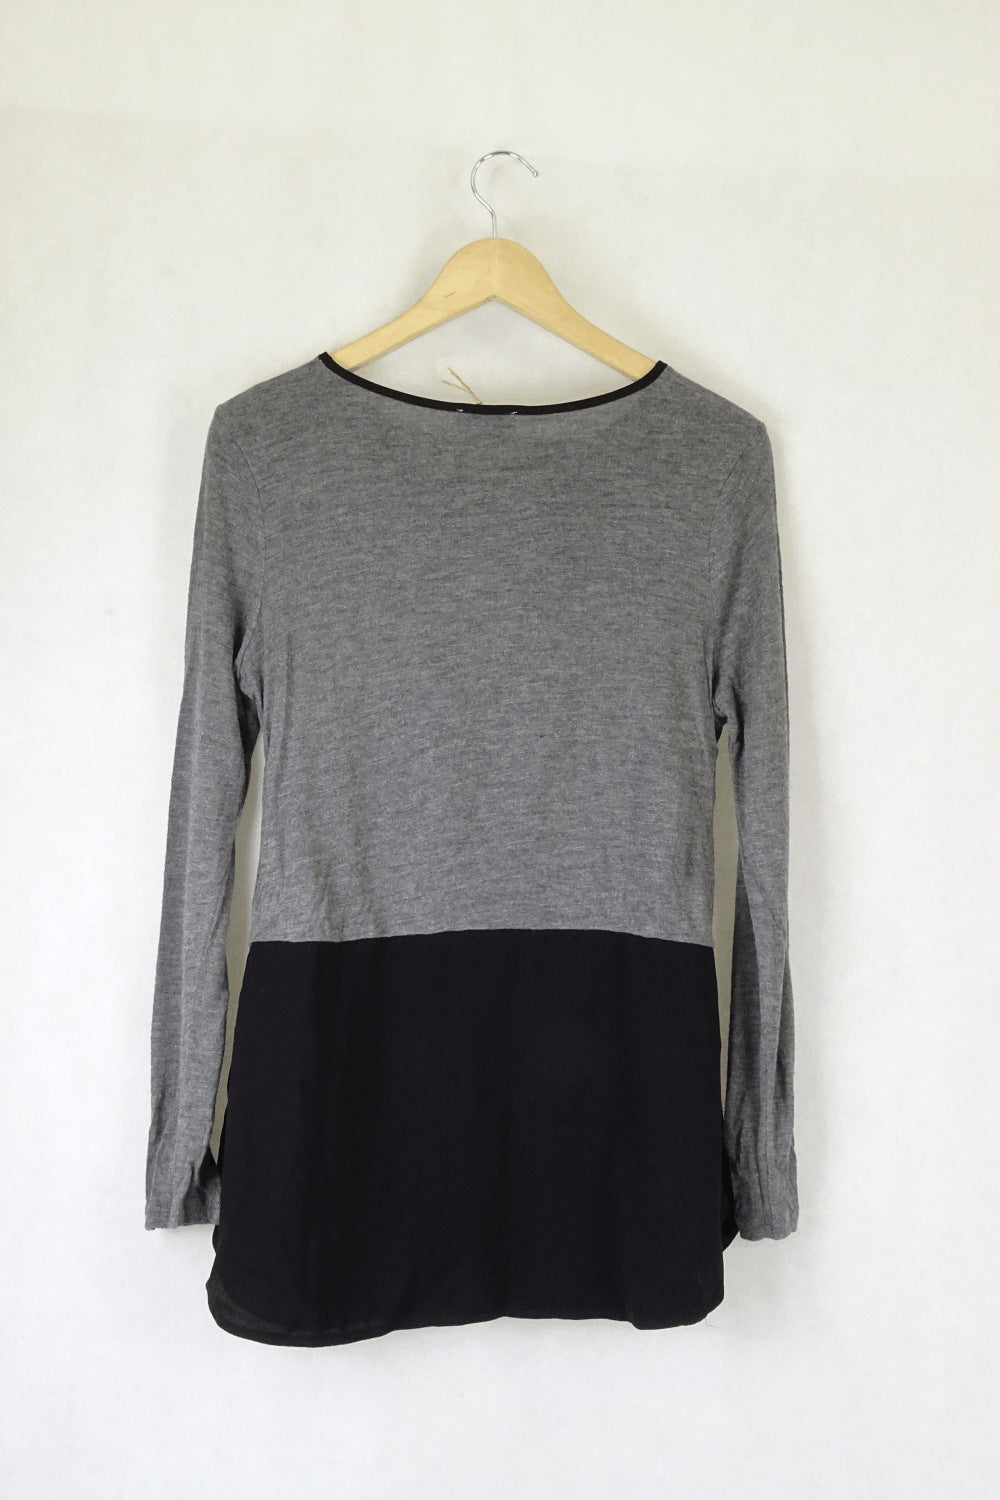 Witchery Black And Grey Top Xs